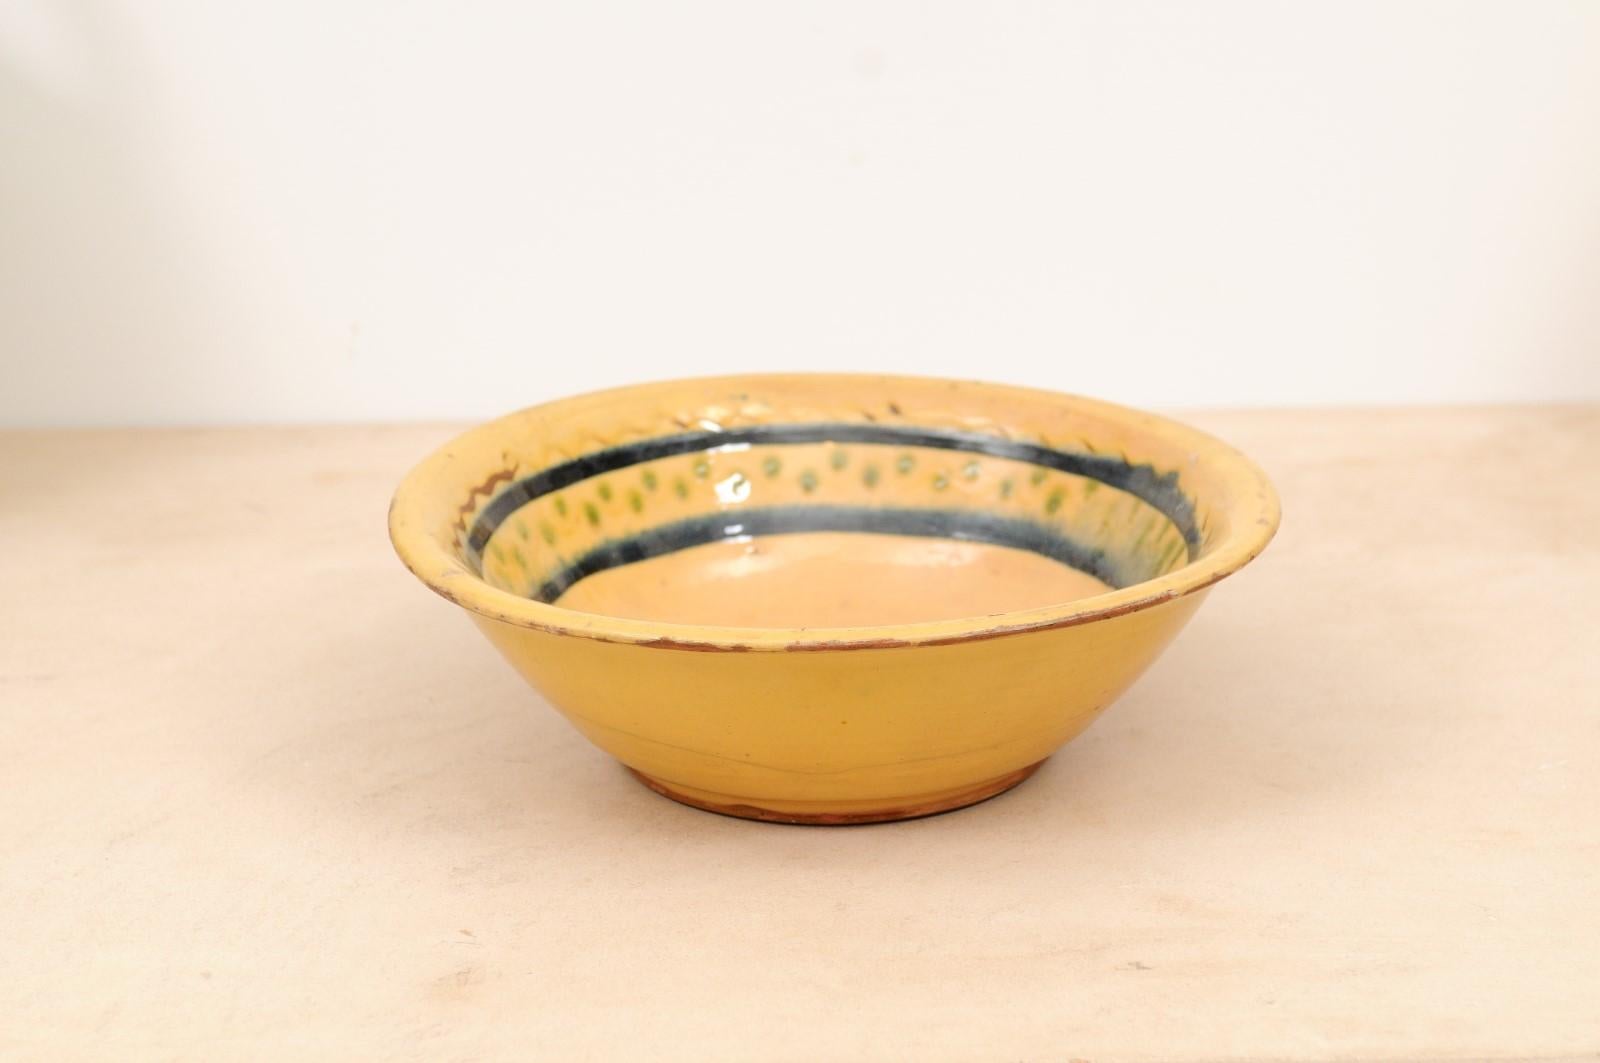 A French 19th century pottery bowl from the Poterie Hertz in Annecy, with yellow glaze. Created in the Alpine town of Annecy in Southeastern France, this pottery bowl features a circular yellow glazed body adorned with black, green and brown motifs.